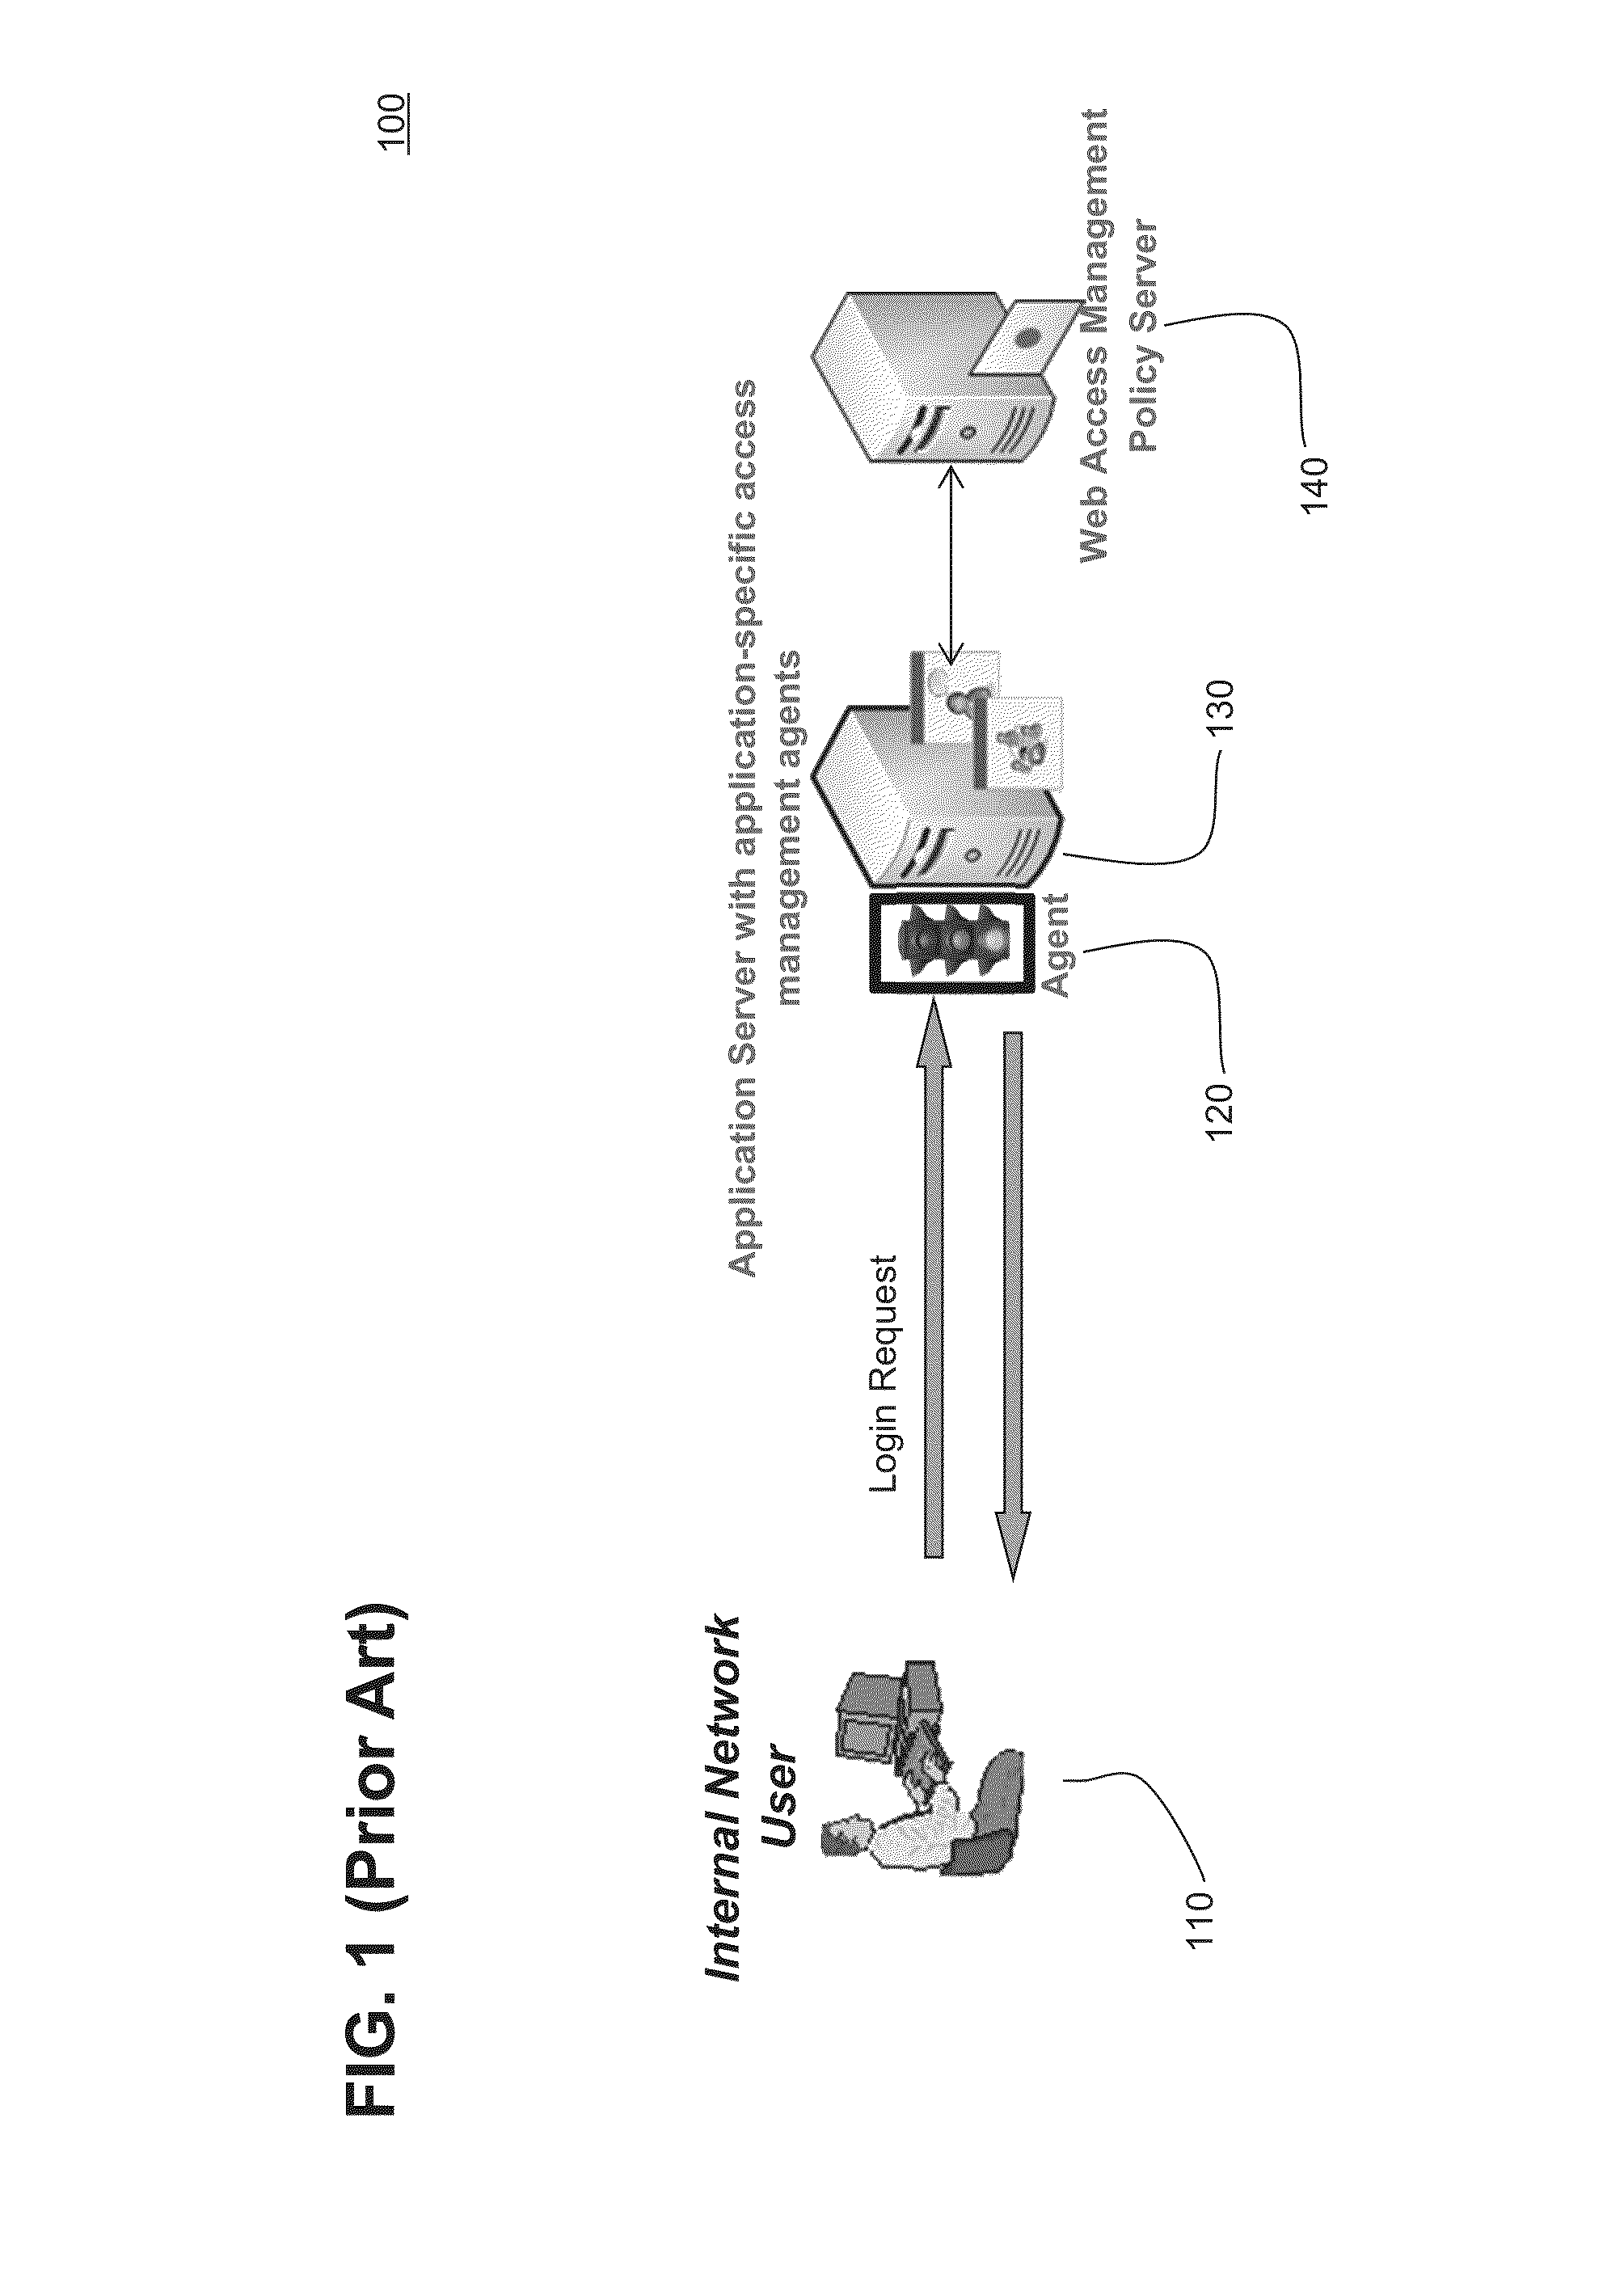 System and Method for Providing Access to a Software Application